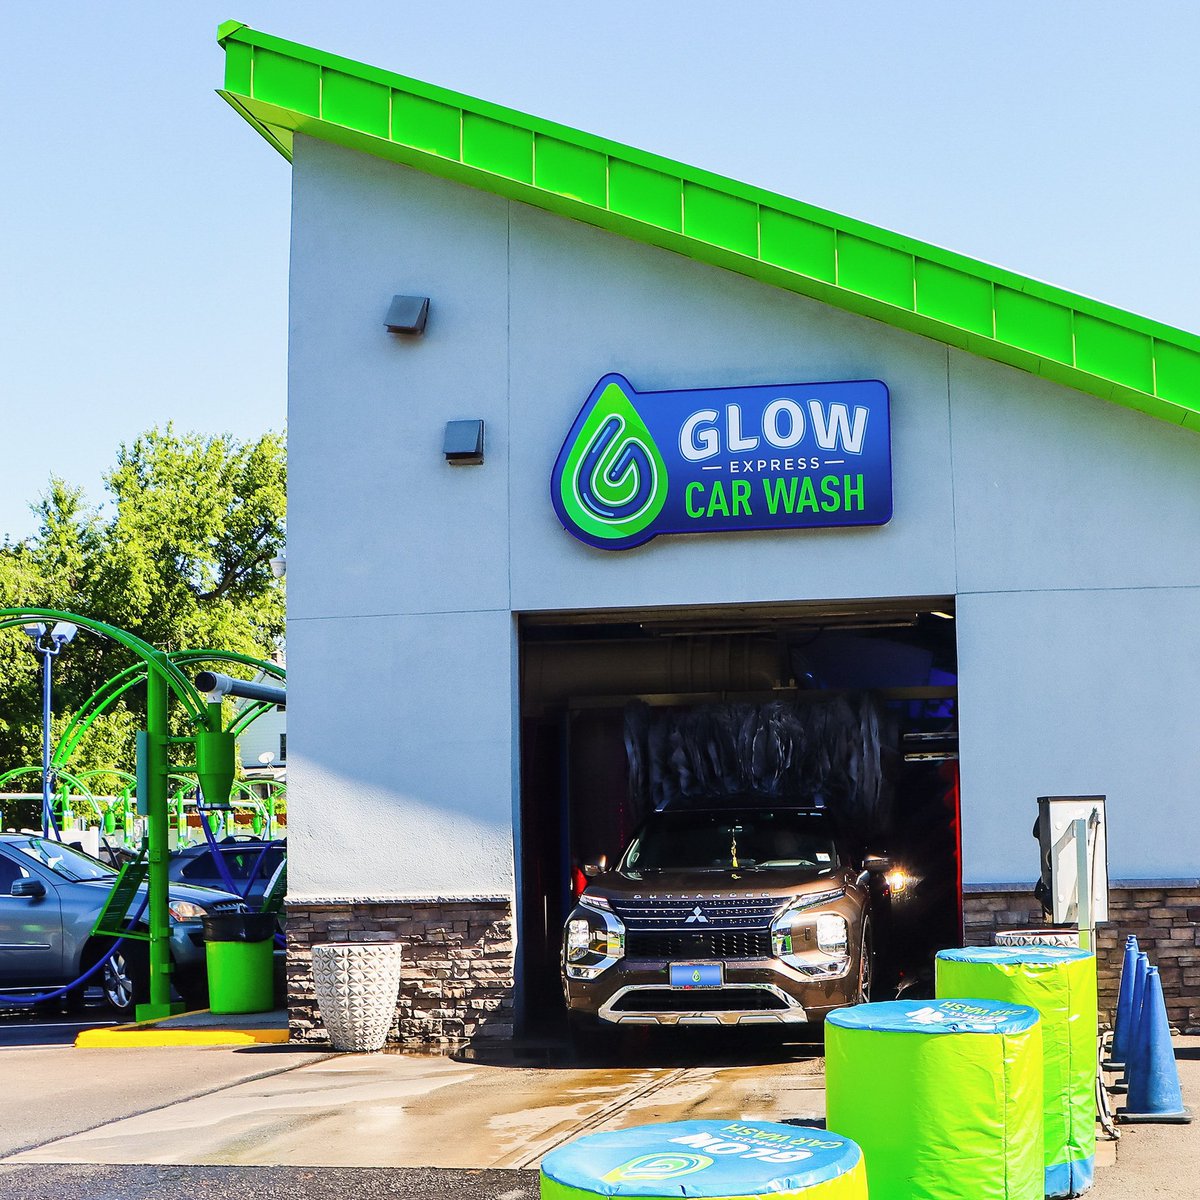 Just an absolutely beautiful day for a wash! 🌞💧 Come on by & get your shine on. ✨

#tuesdaytip #glowcarwash #sunnyday #springtime #carwash